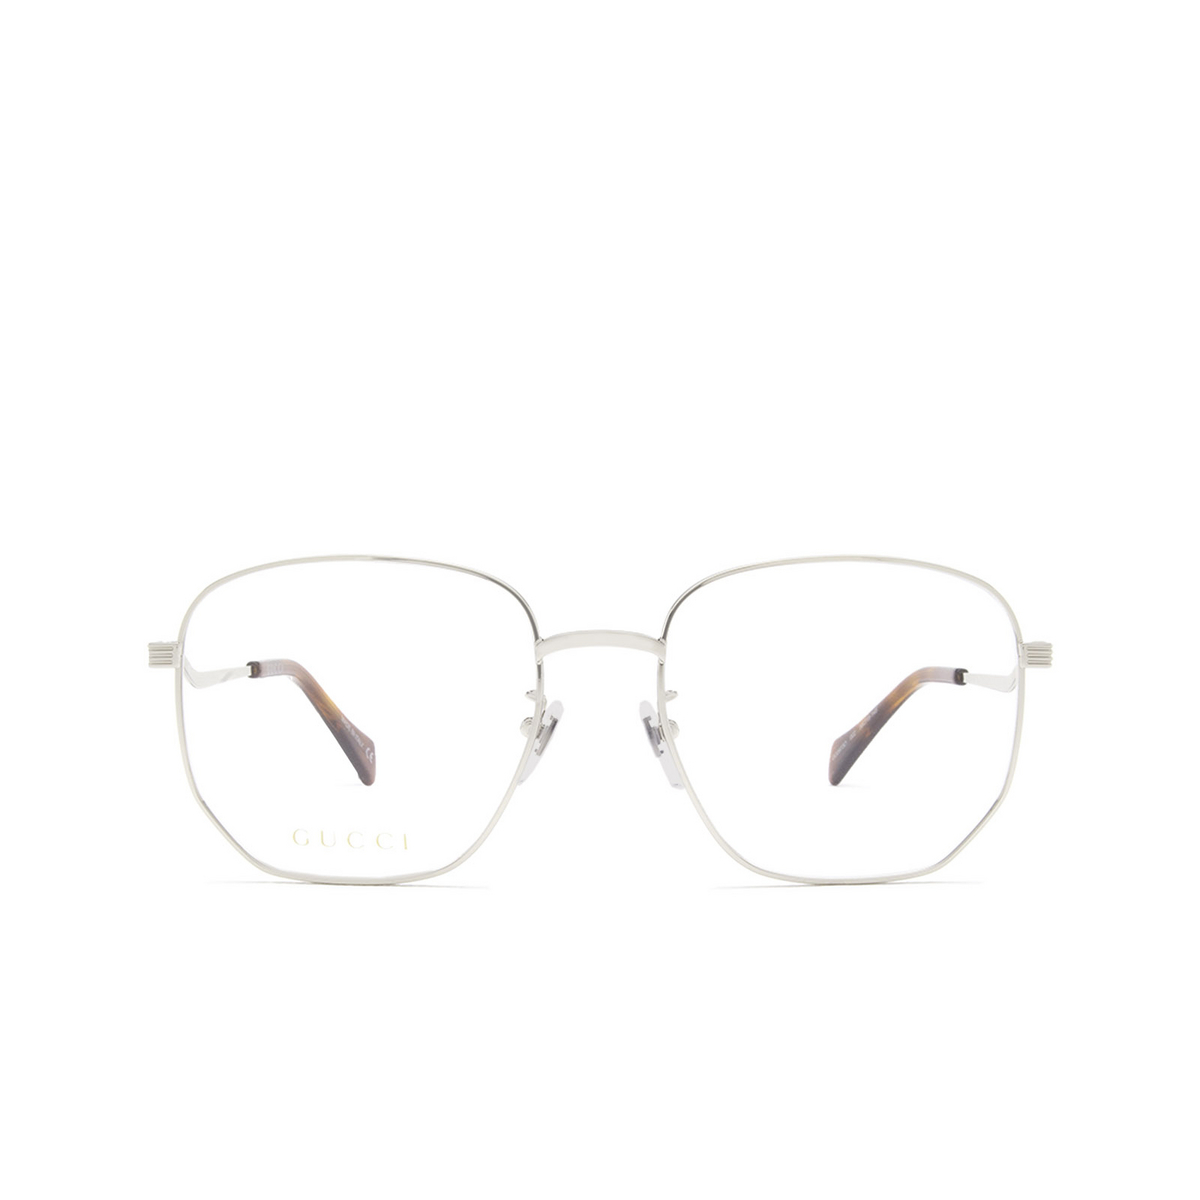 Gucci® Square Eyeglasses: GG0973O color Silver 002 - front view.